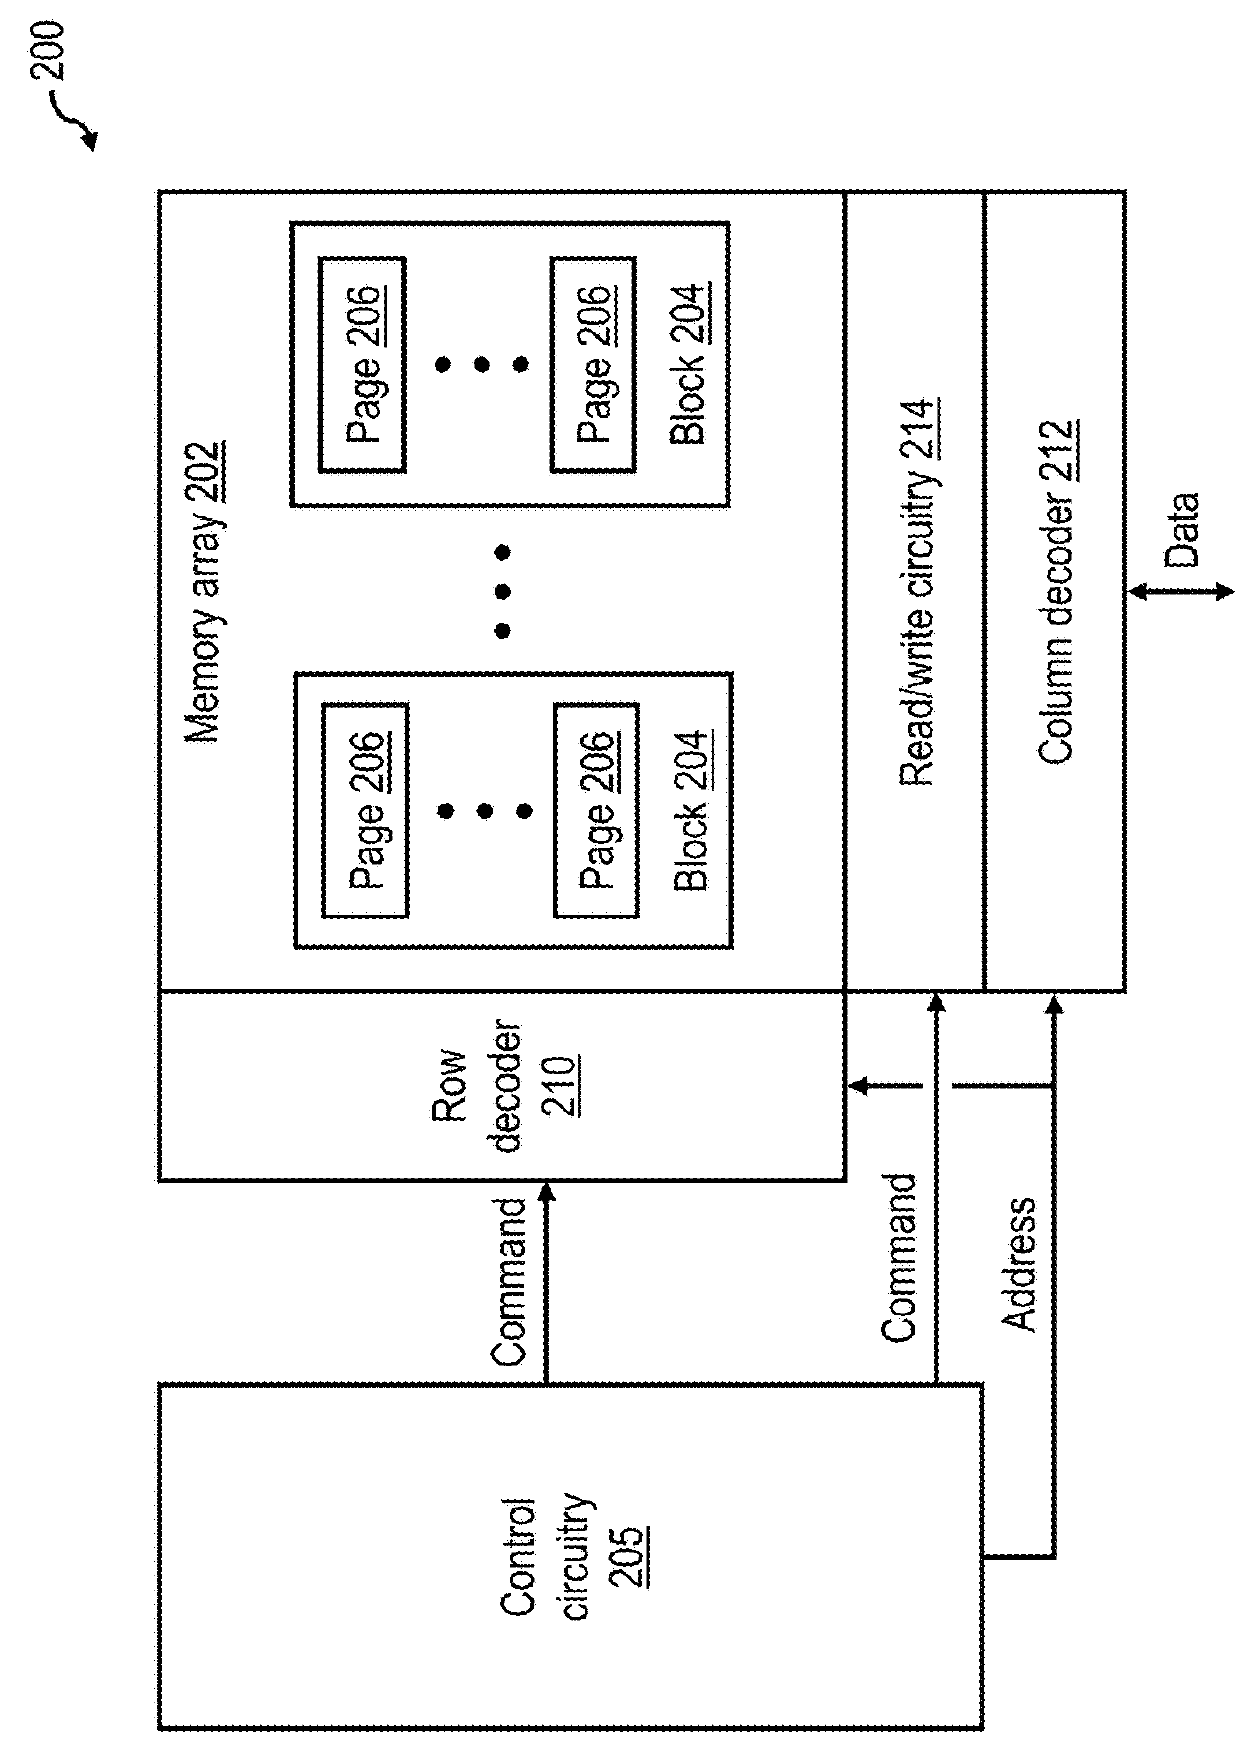 Data storage system employing a hot spare to proactively store array data in absence of a failure or pre-failure event